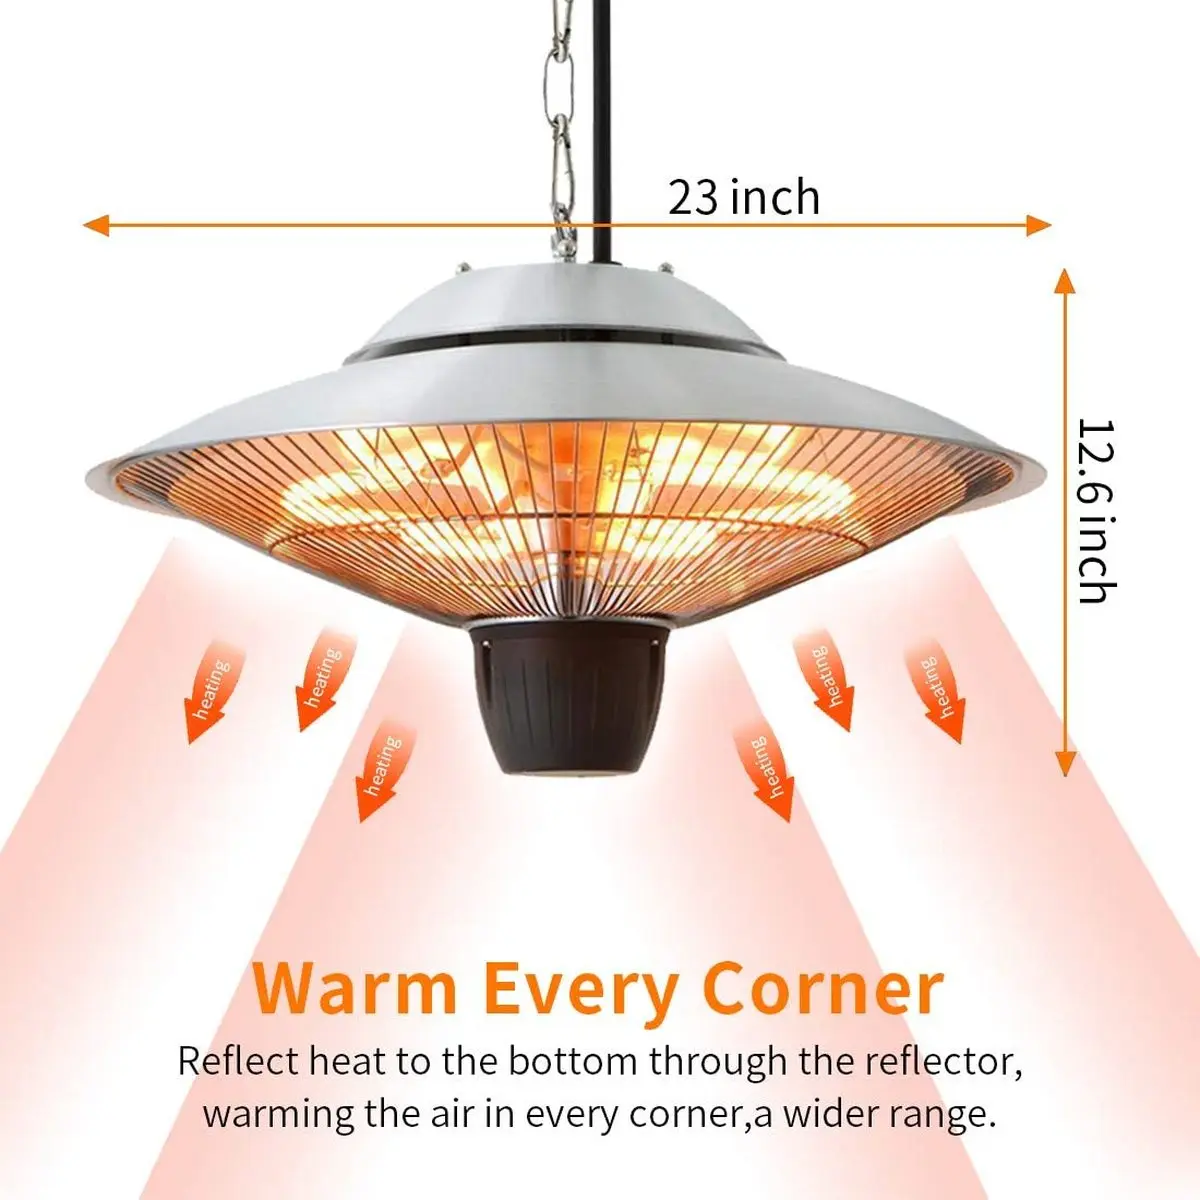 Electric Hanging Patio Heater 1500W Home Balcony Ceiling Mounted Heater